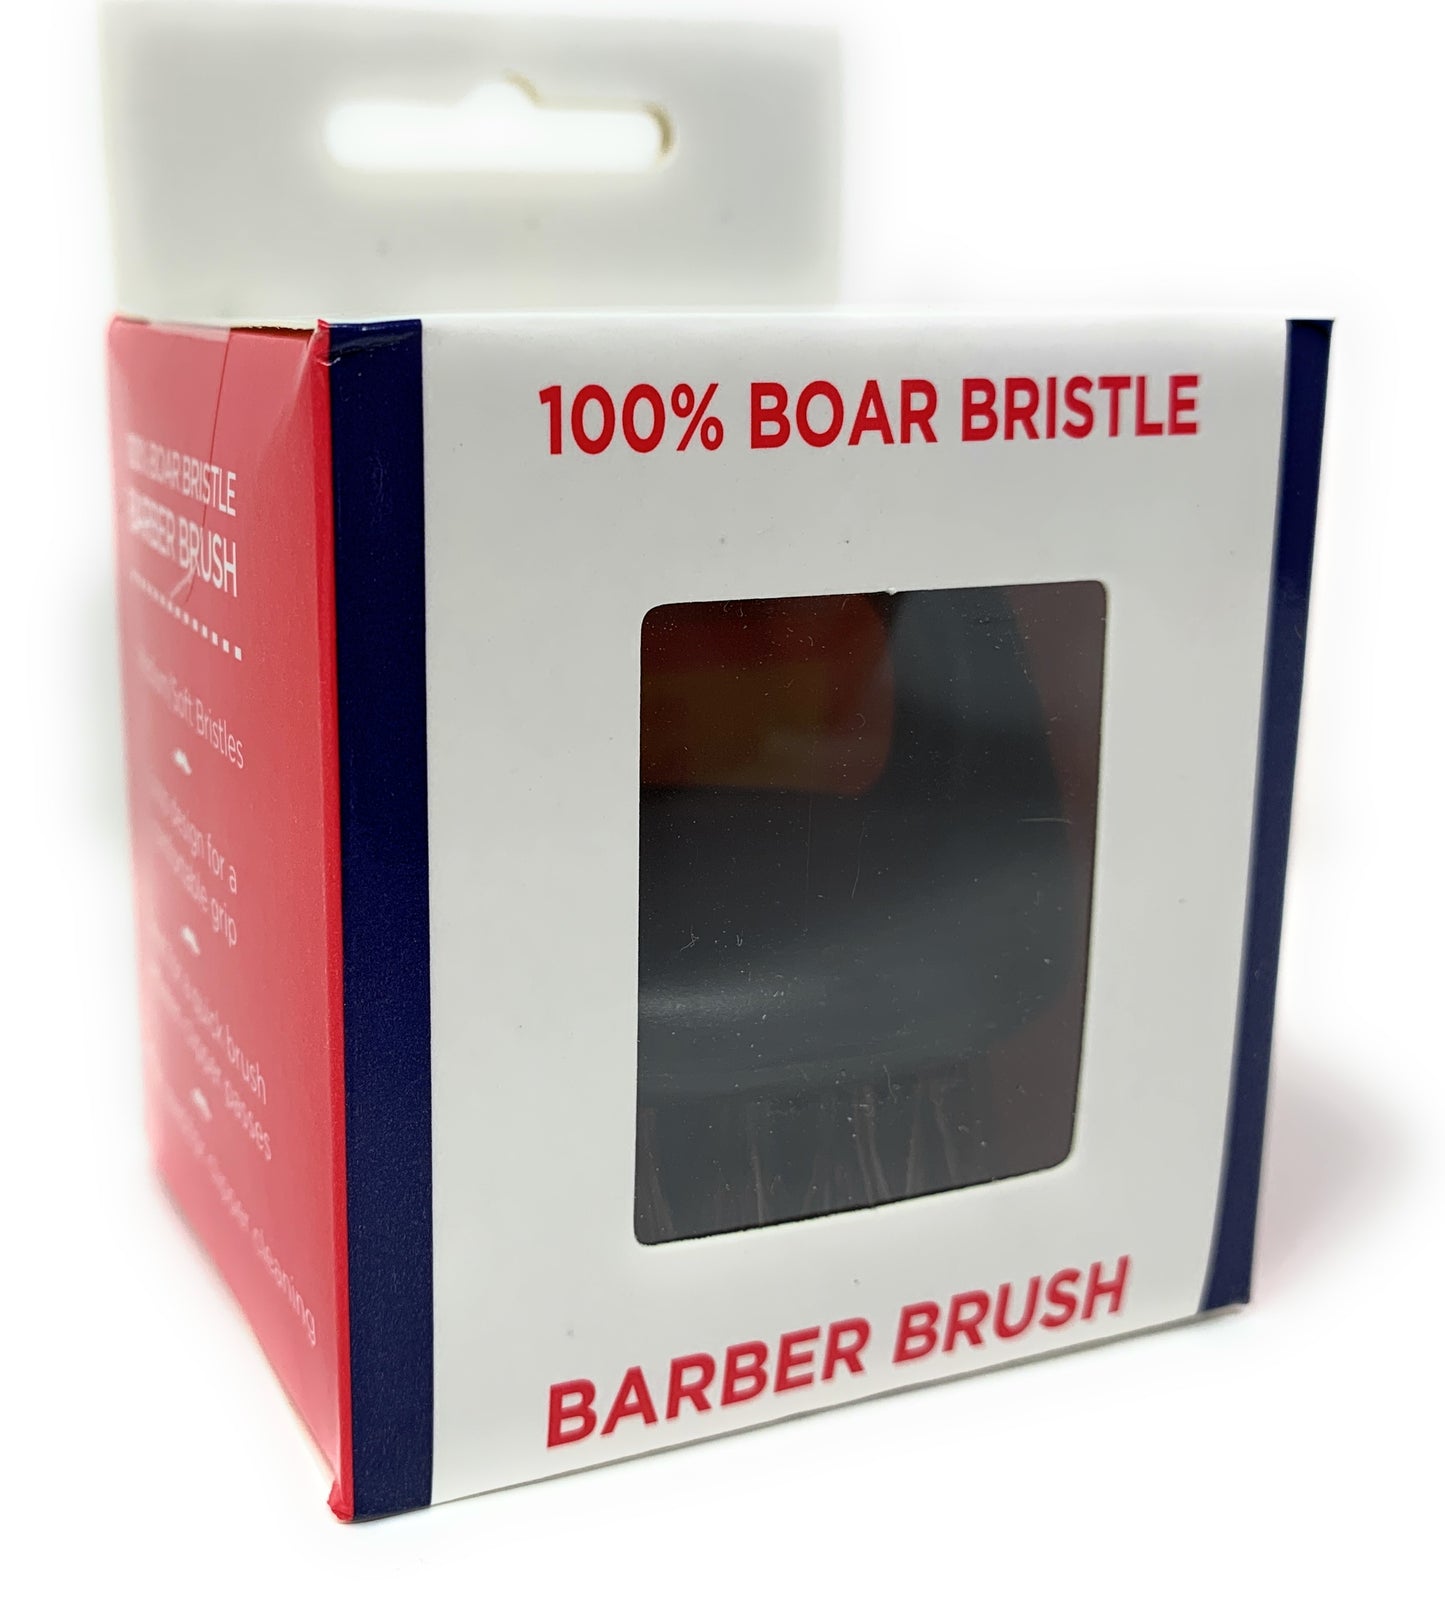 Scalpmaster Barber Brush 100% Boar Bristle Loop Handle Cleans Blades and Combs 1 Pc.